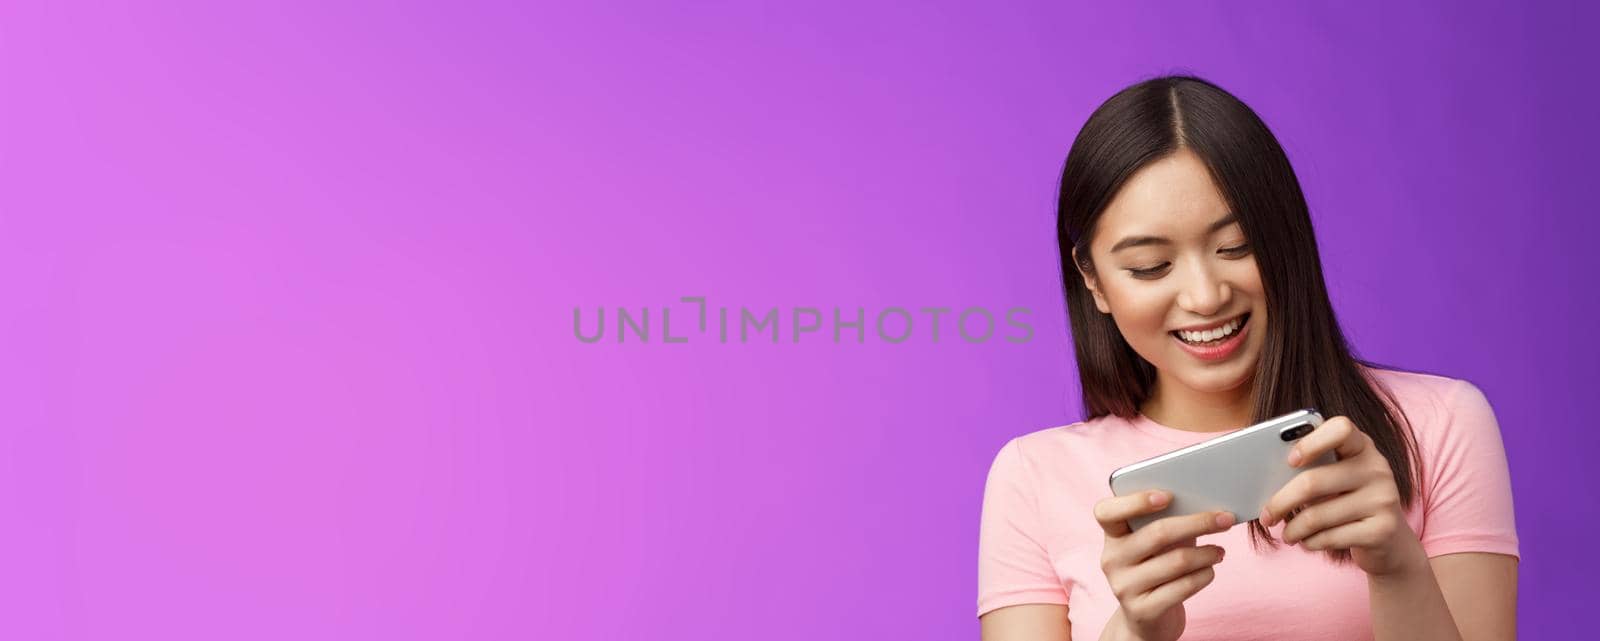 Close-up joyful attractive asian woman brunette having fun spend time playing smartphone game, laughing smiling eager win race, hold phone horizontal beating score, purple background.